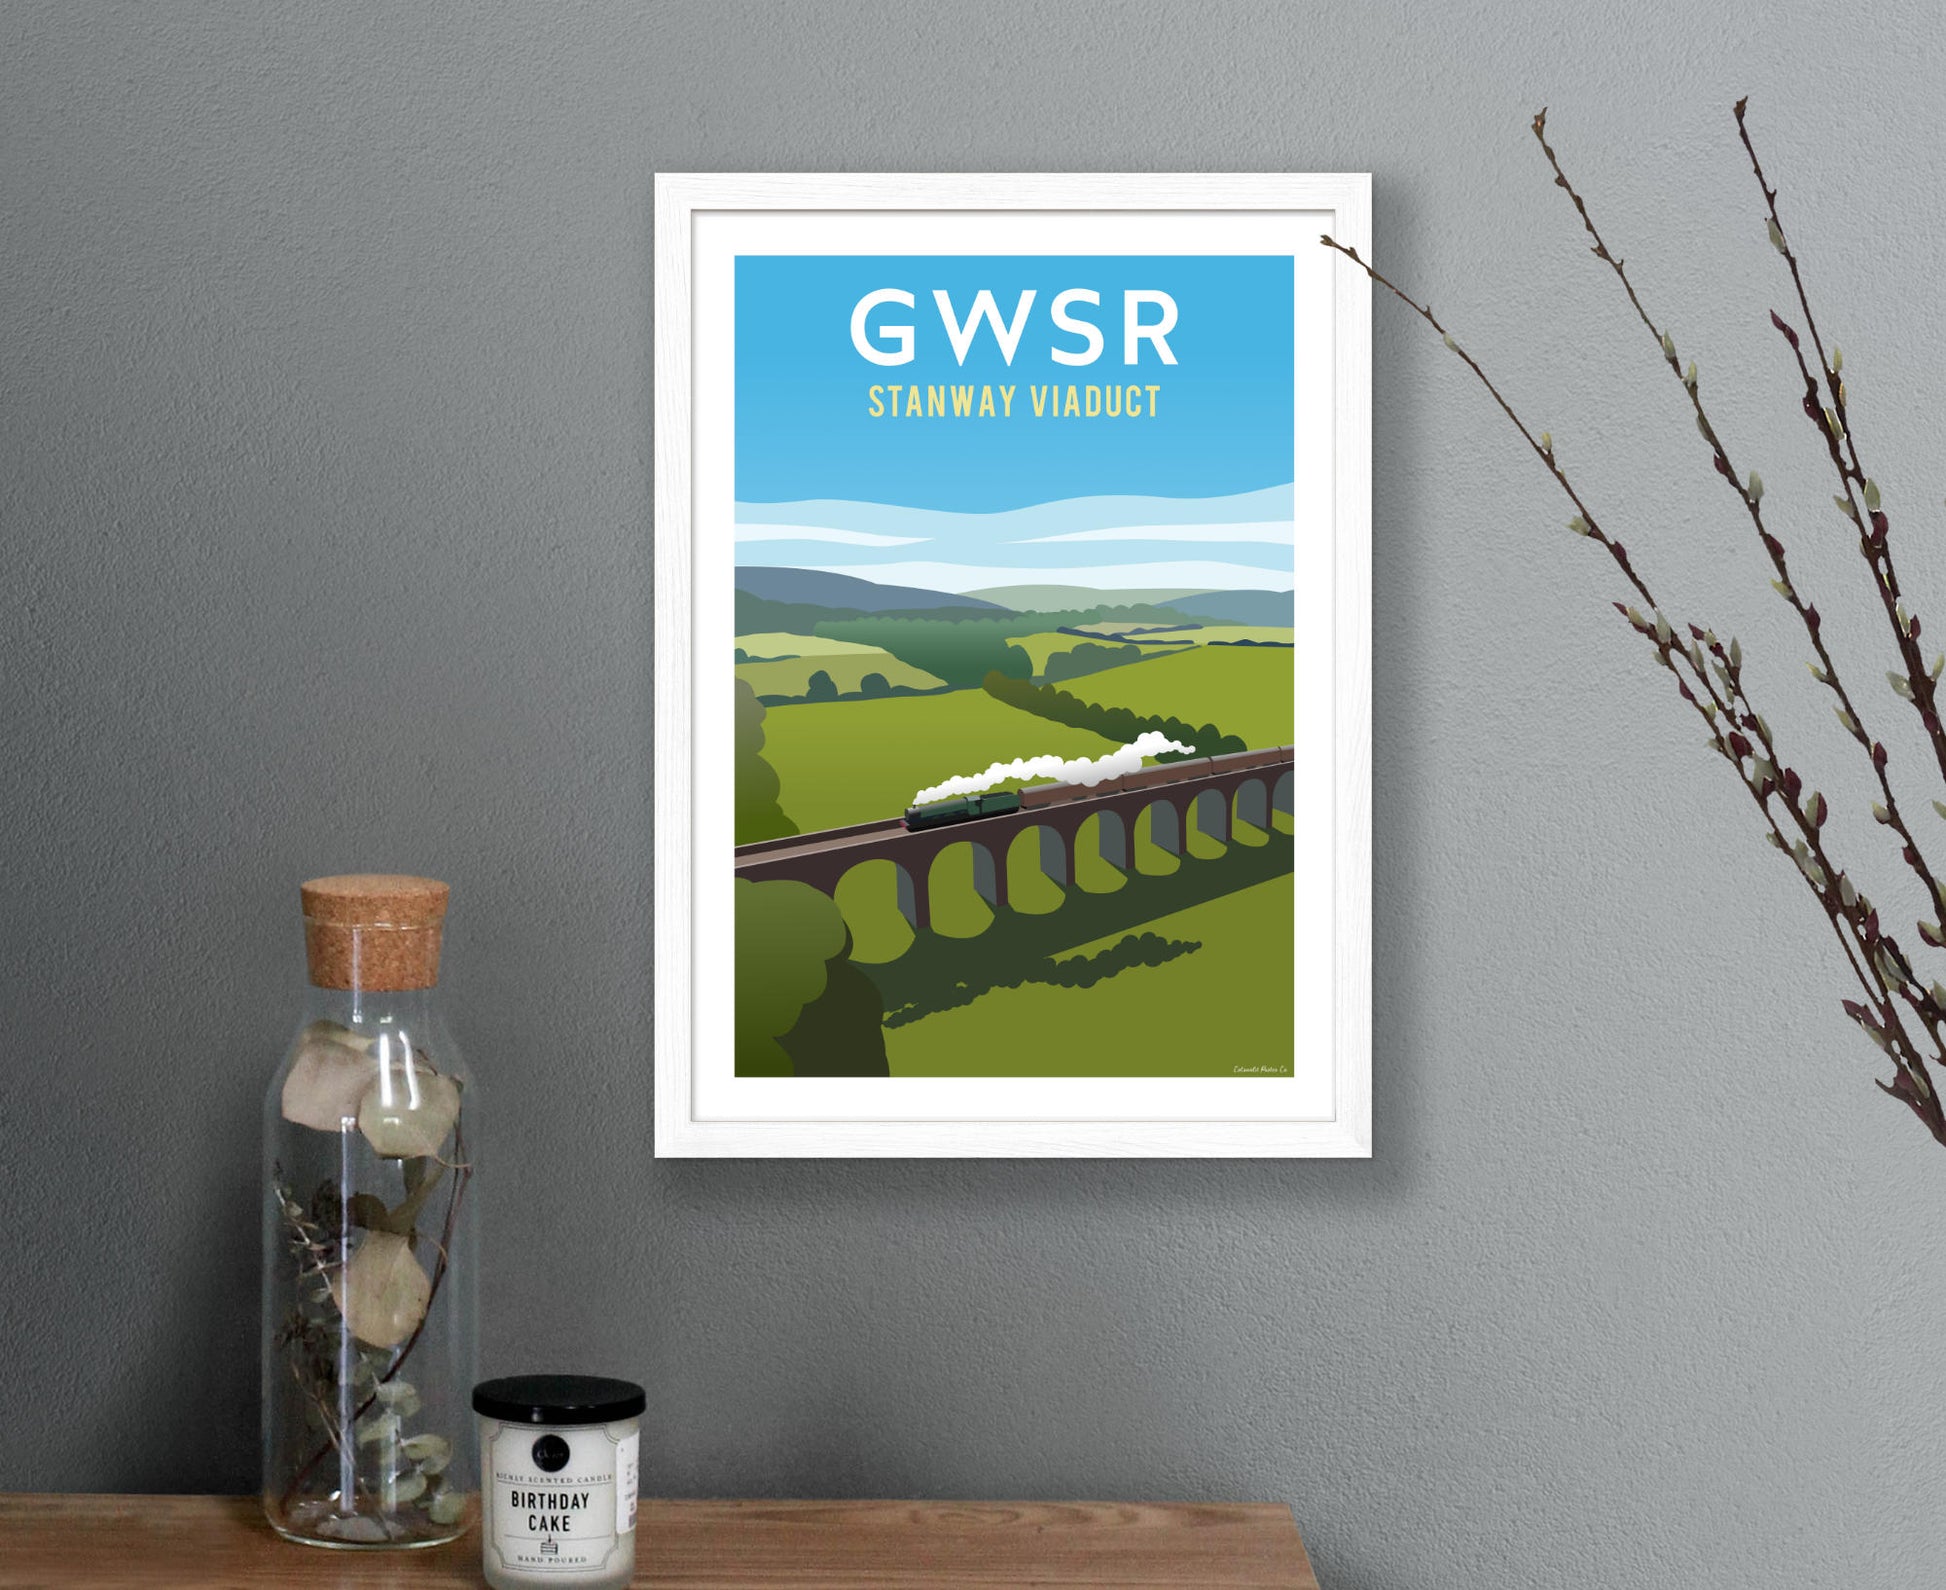 GWSR Stanway Viaduct Poster in white frame